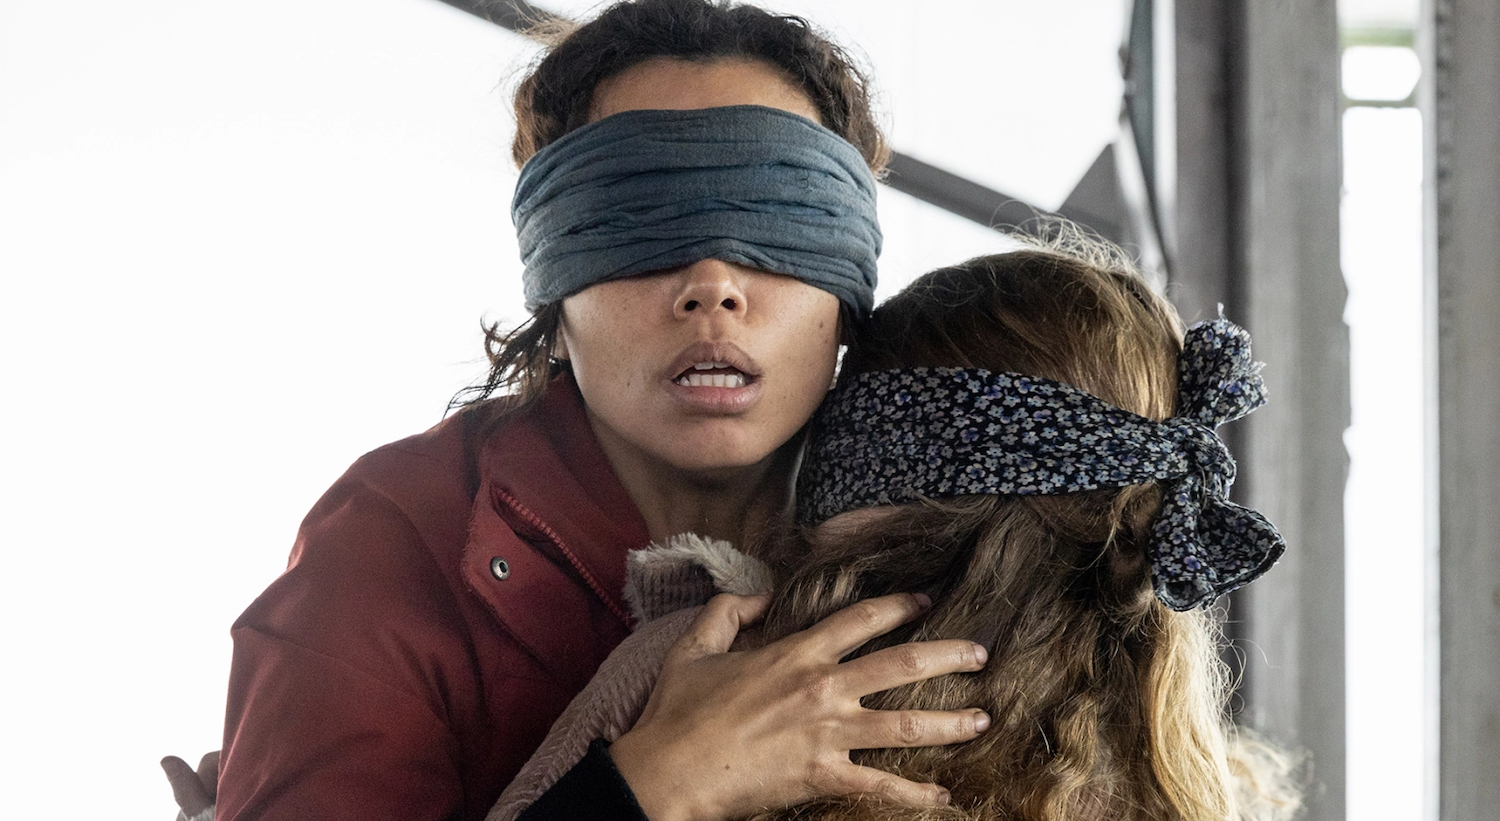 Blindfolding Doesn't Help People Understand What It's Like to be